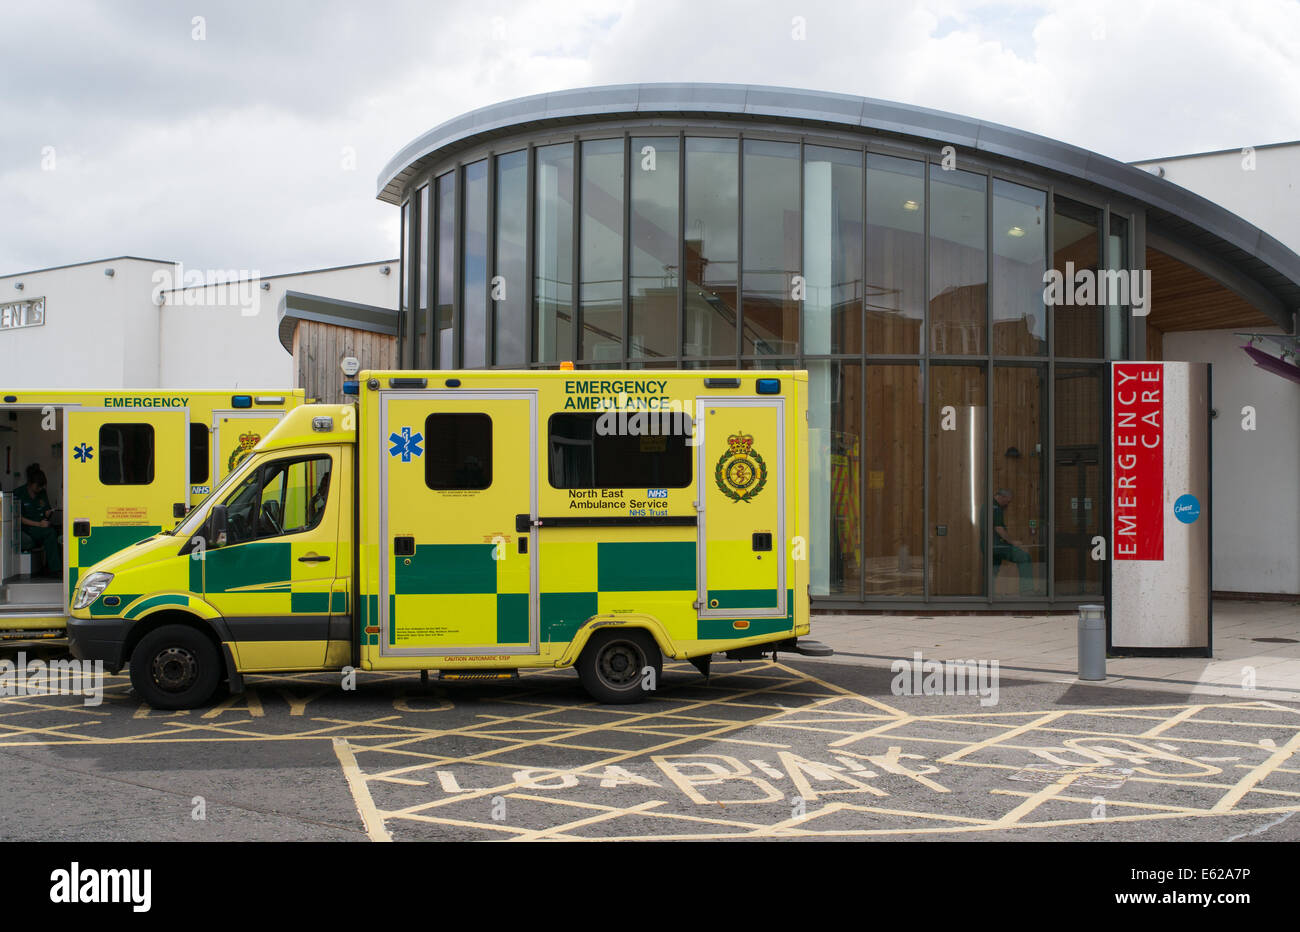 Entrance to the Accident and Emergency department of South Tyneside District Hospital north east England UK Stock Photo